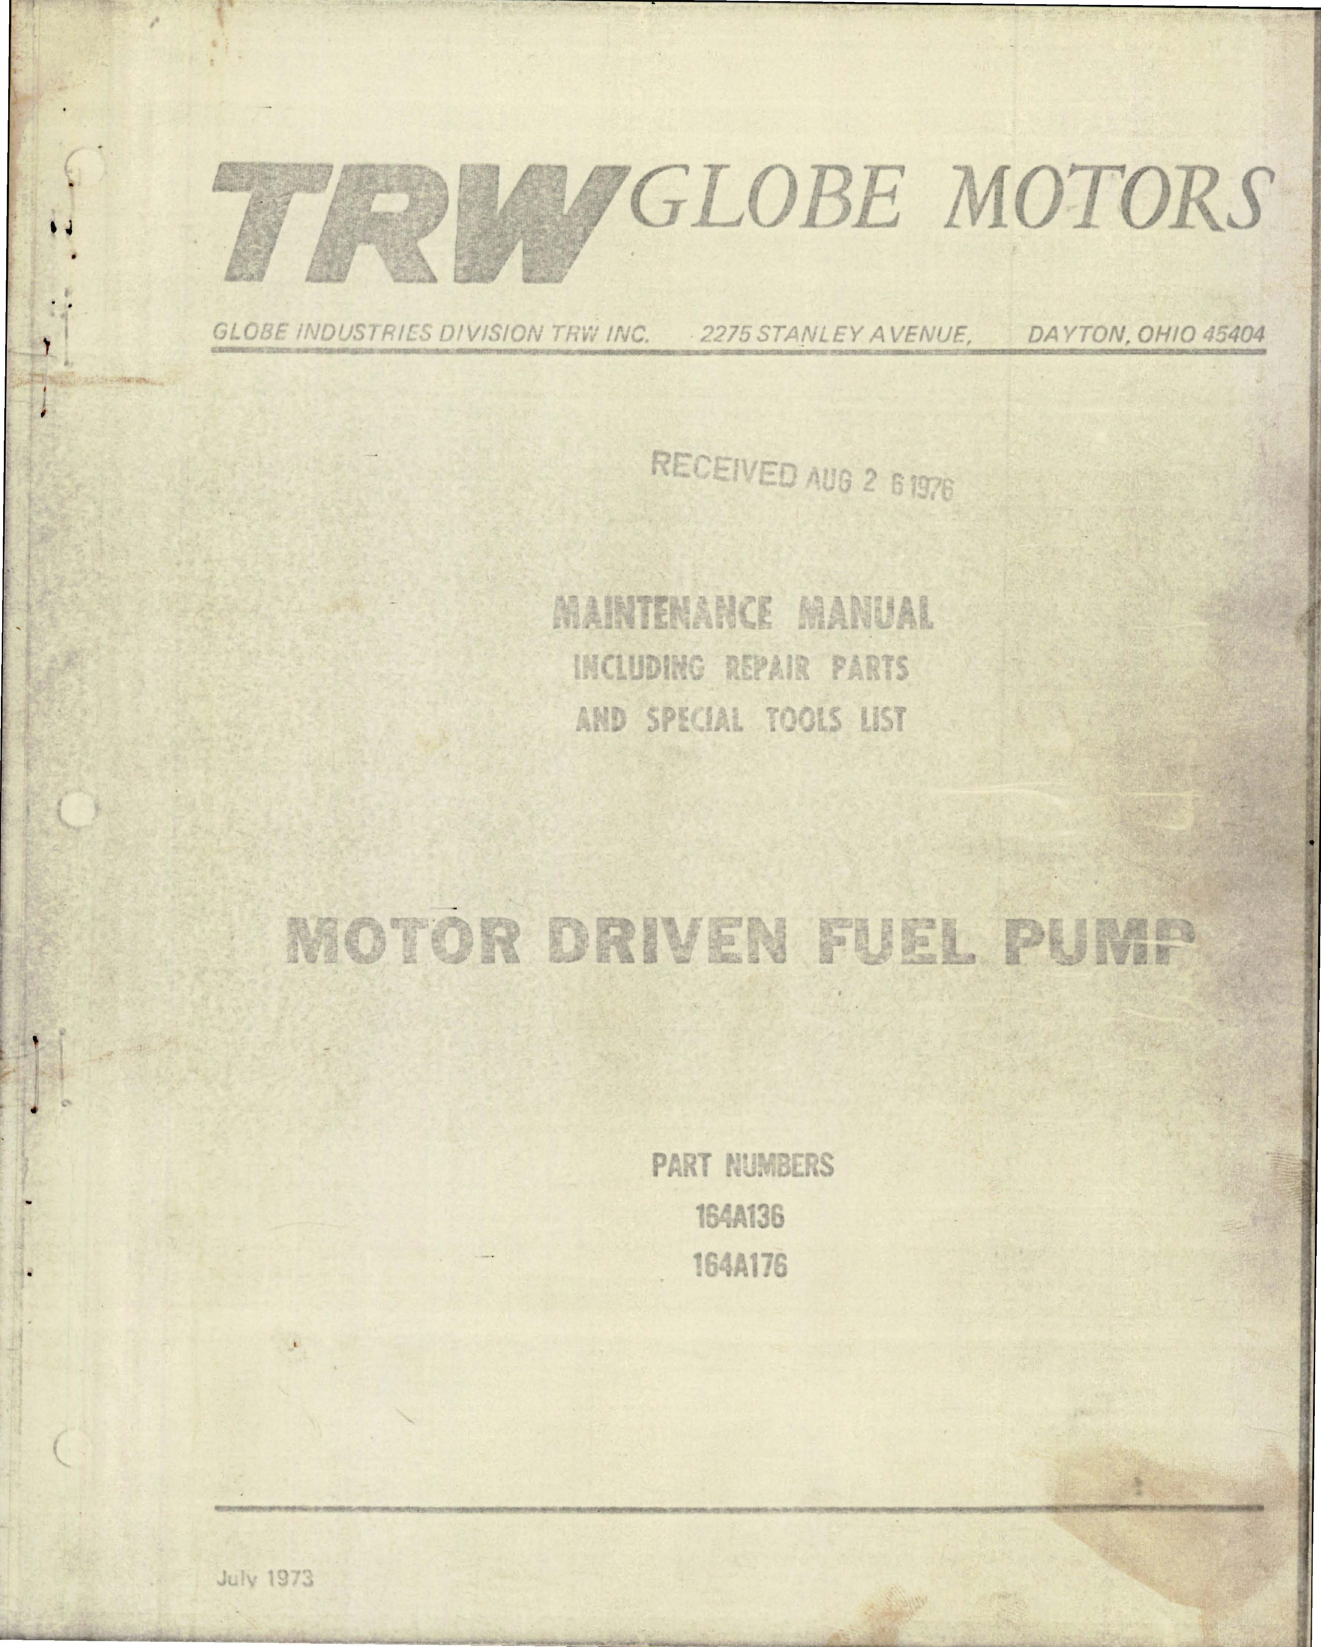 Sample page 1 from AirCorps Library document: Maintenance Manual including Repair Parts and Special Tools for Motor Driven Fuel Pumps - Parts 164A136 and 164A176